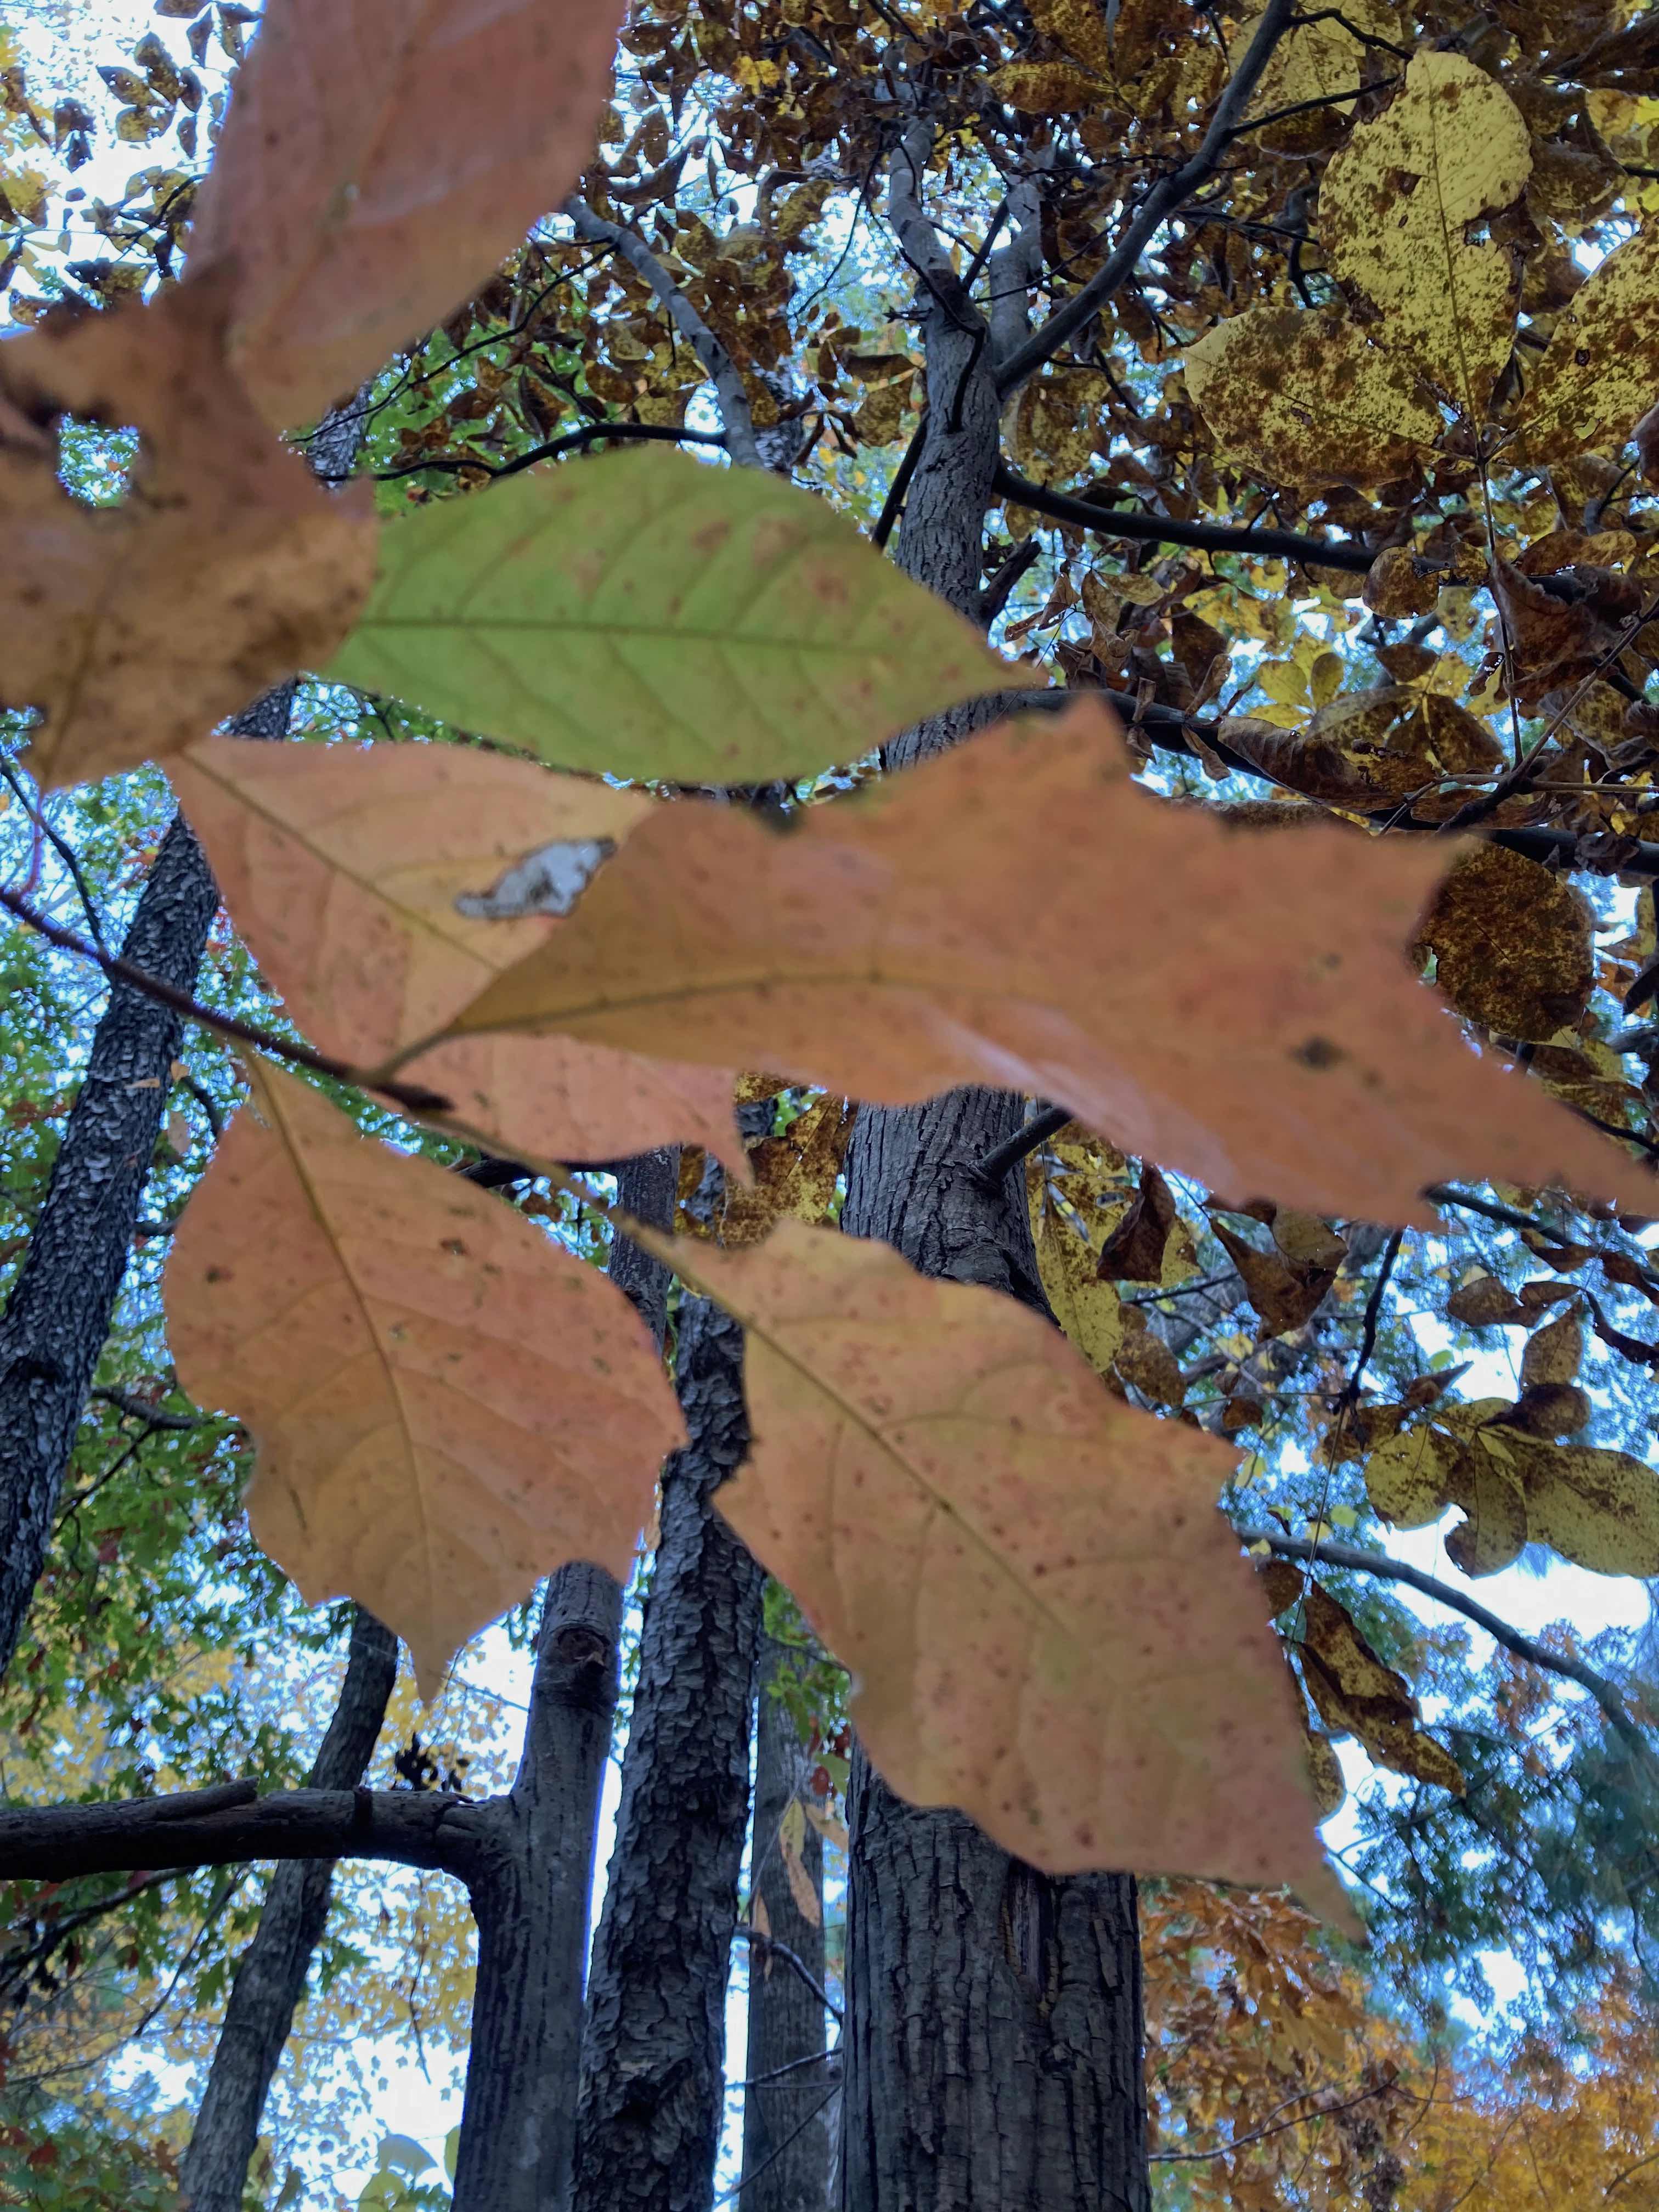 The Scientific Name is Nyssa sylvatica. You will likely hear them called Blackgum, Black Gum, Black Tupelo, Sourgum, Pepperidge, Tupelo Gum. This picture shows the Sporting some Fall color. Tooth-like projections on the margins are very apparent. of Nyssa sylvatica